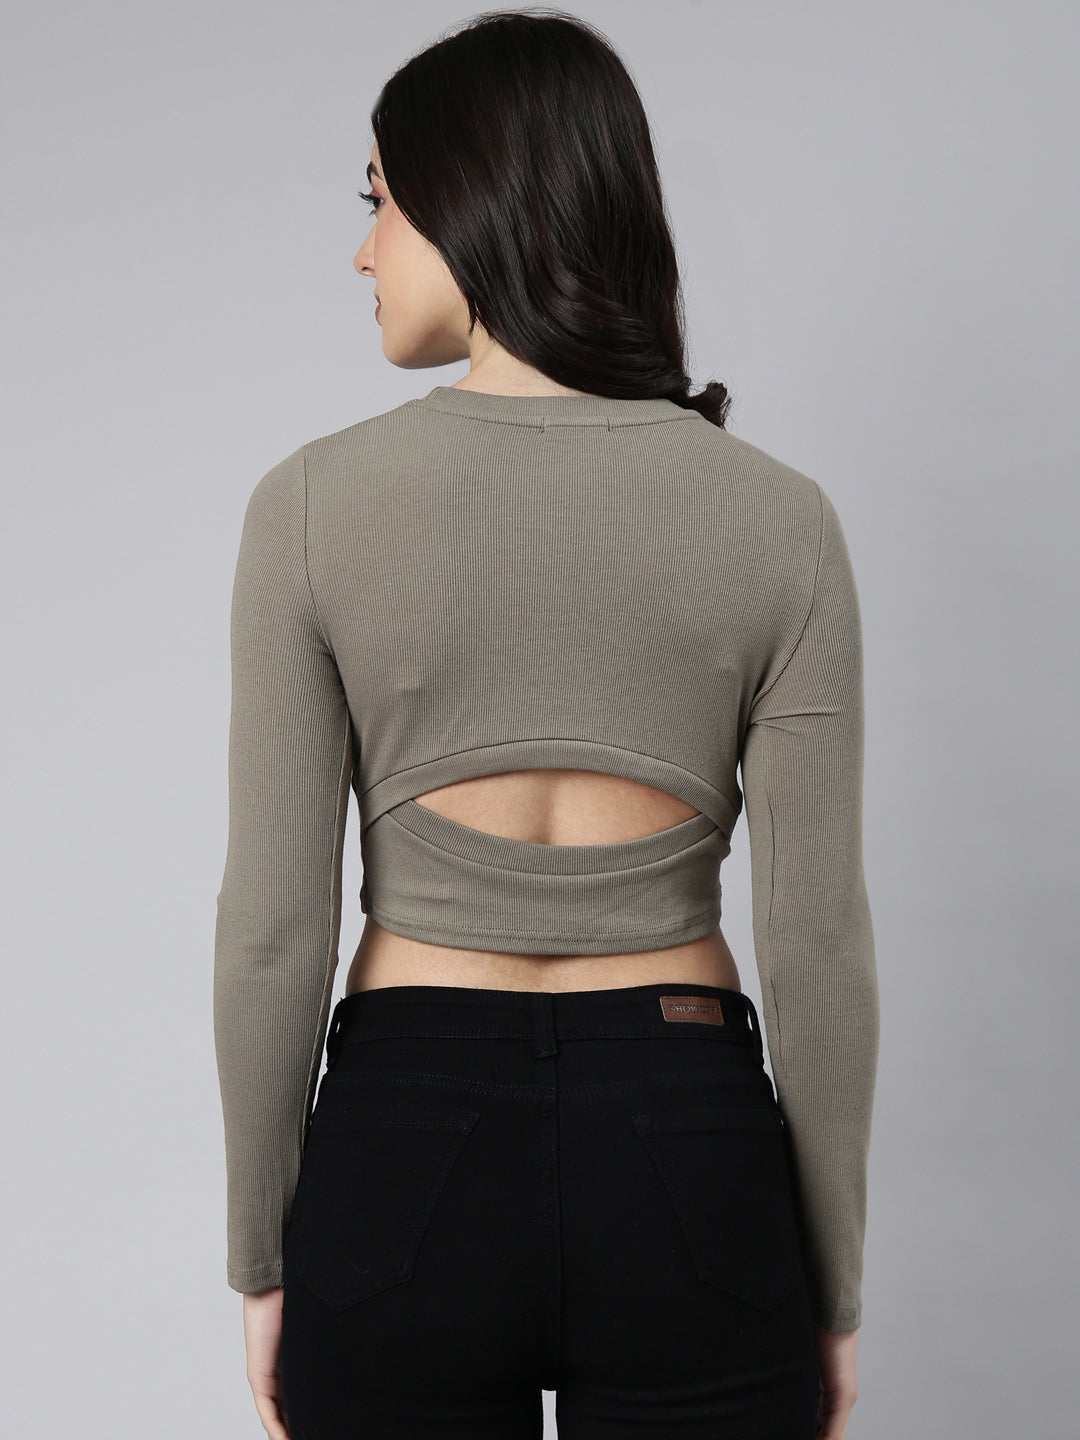 Women Solid Olive Styled Back Crop Top